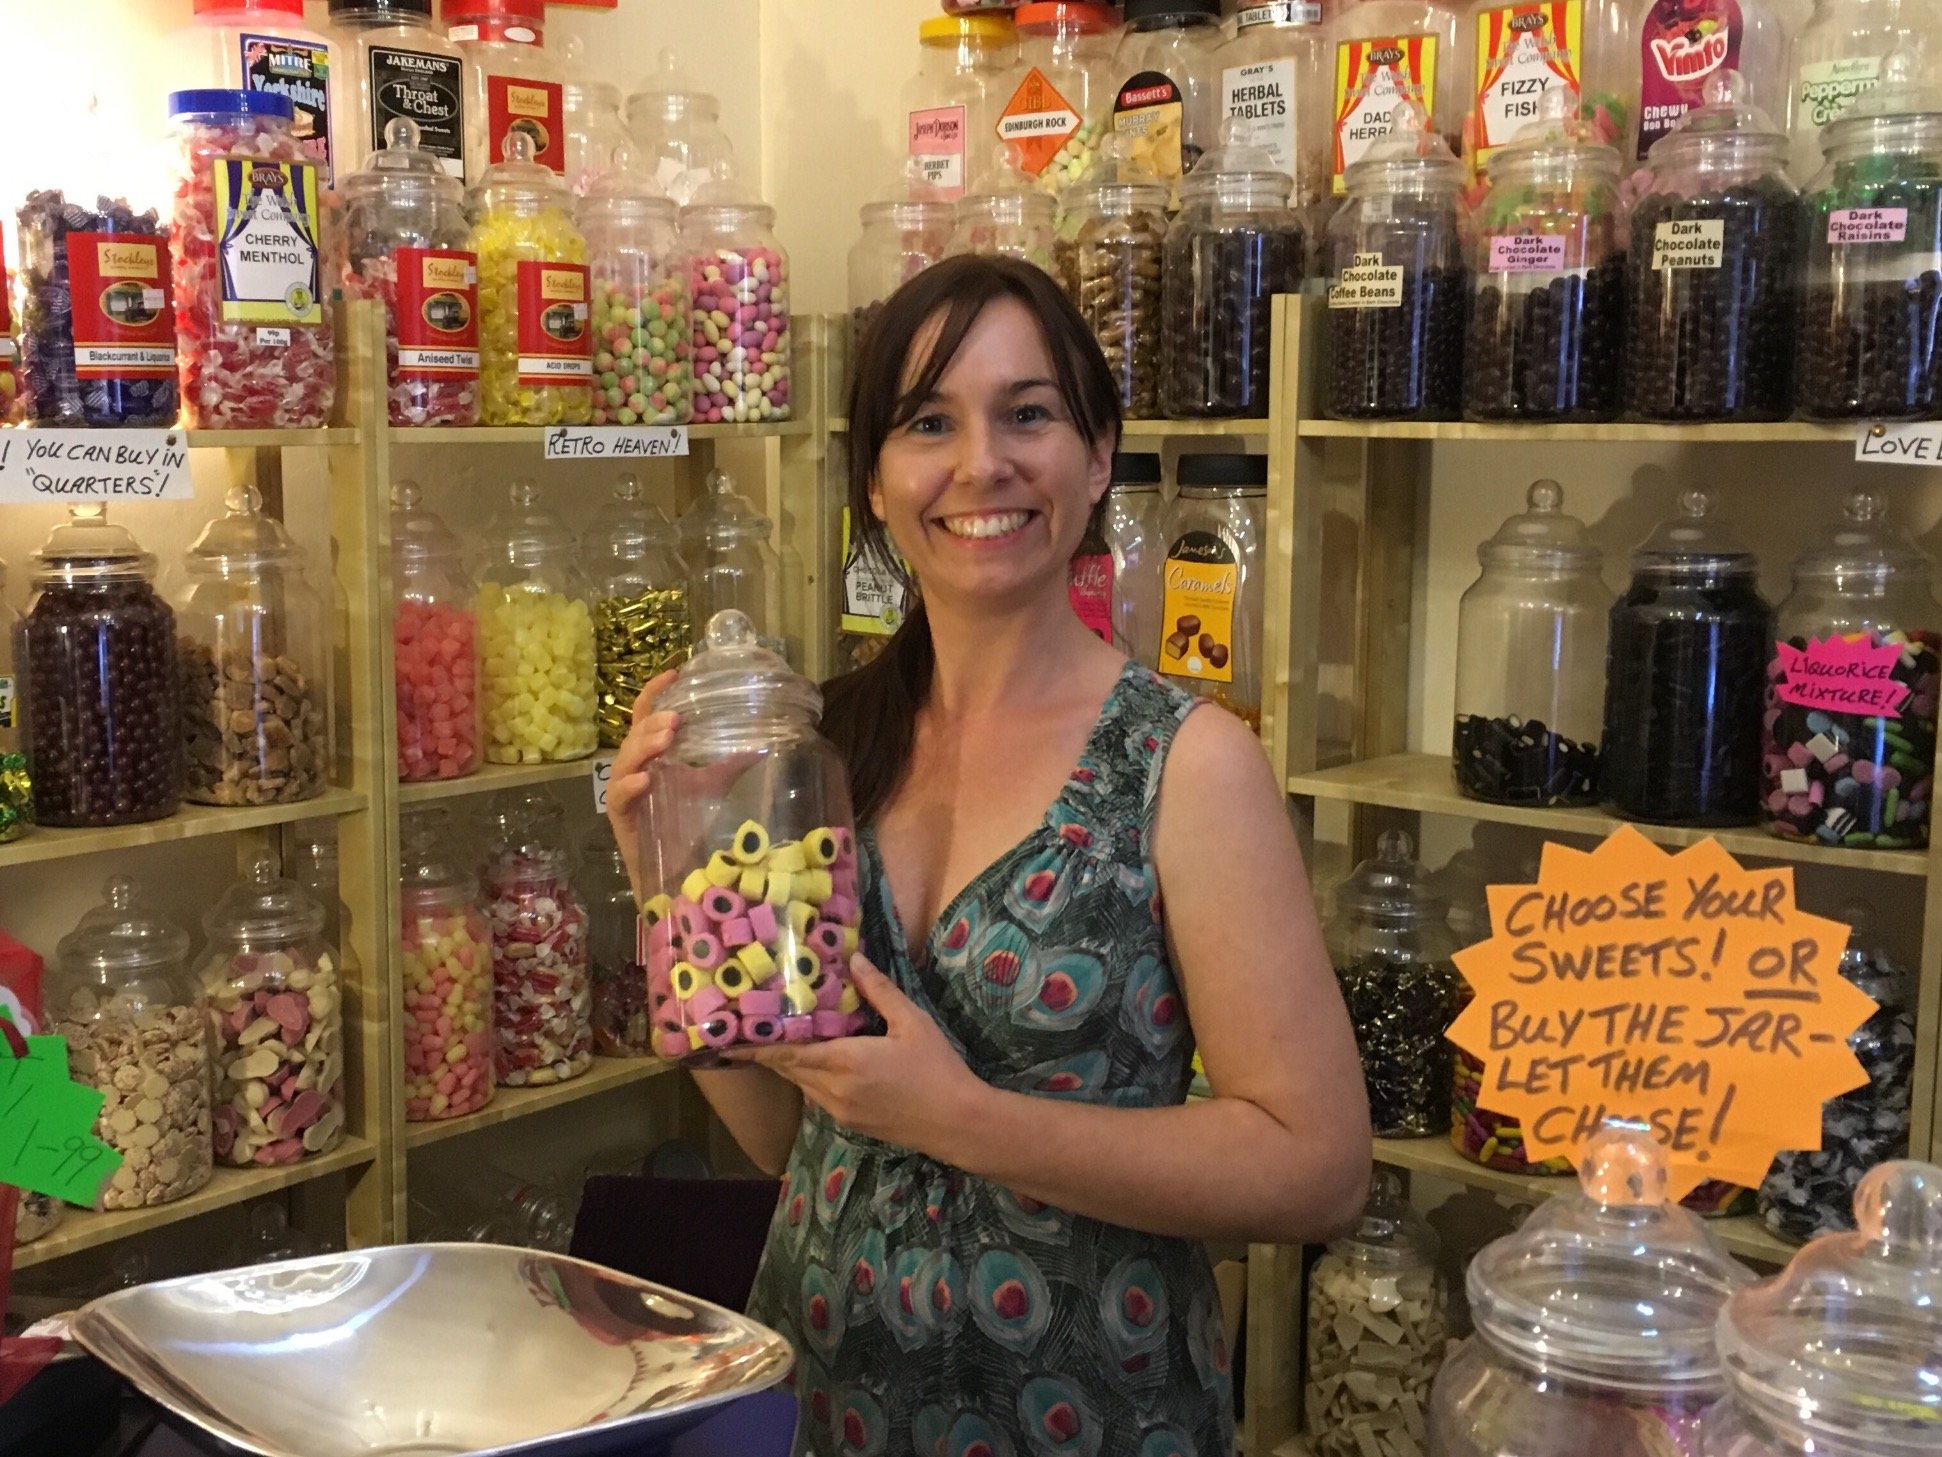 Top quality traditional sweets, sugar free diabetic range,  vegetarian & vegan sweets.  Unique, bespoke gifts & ice cream! The small shop with the big choice!